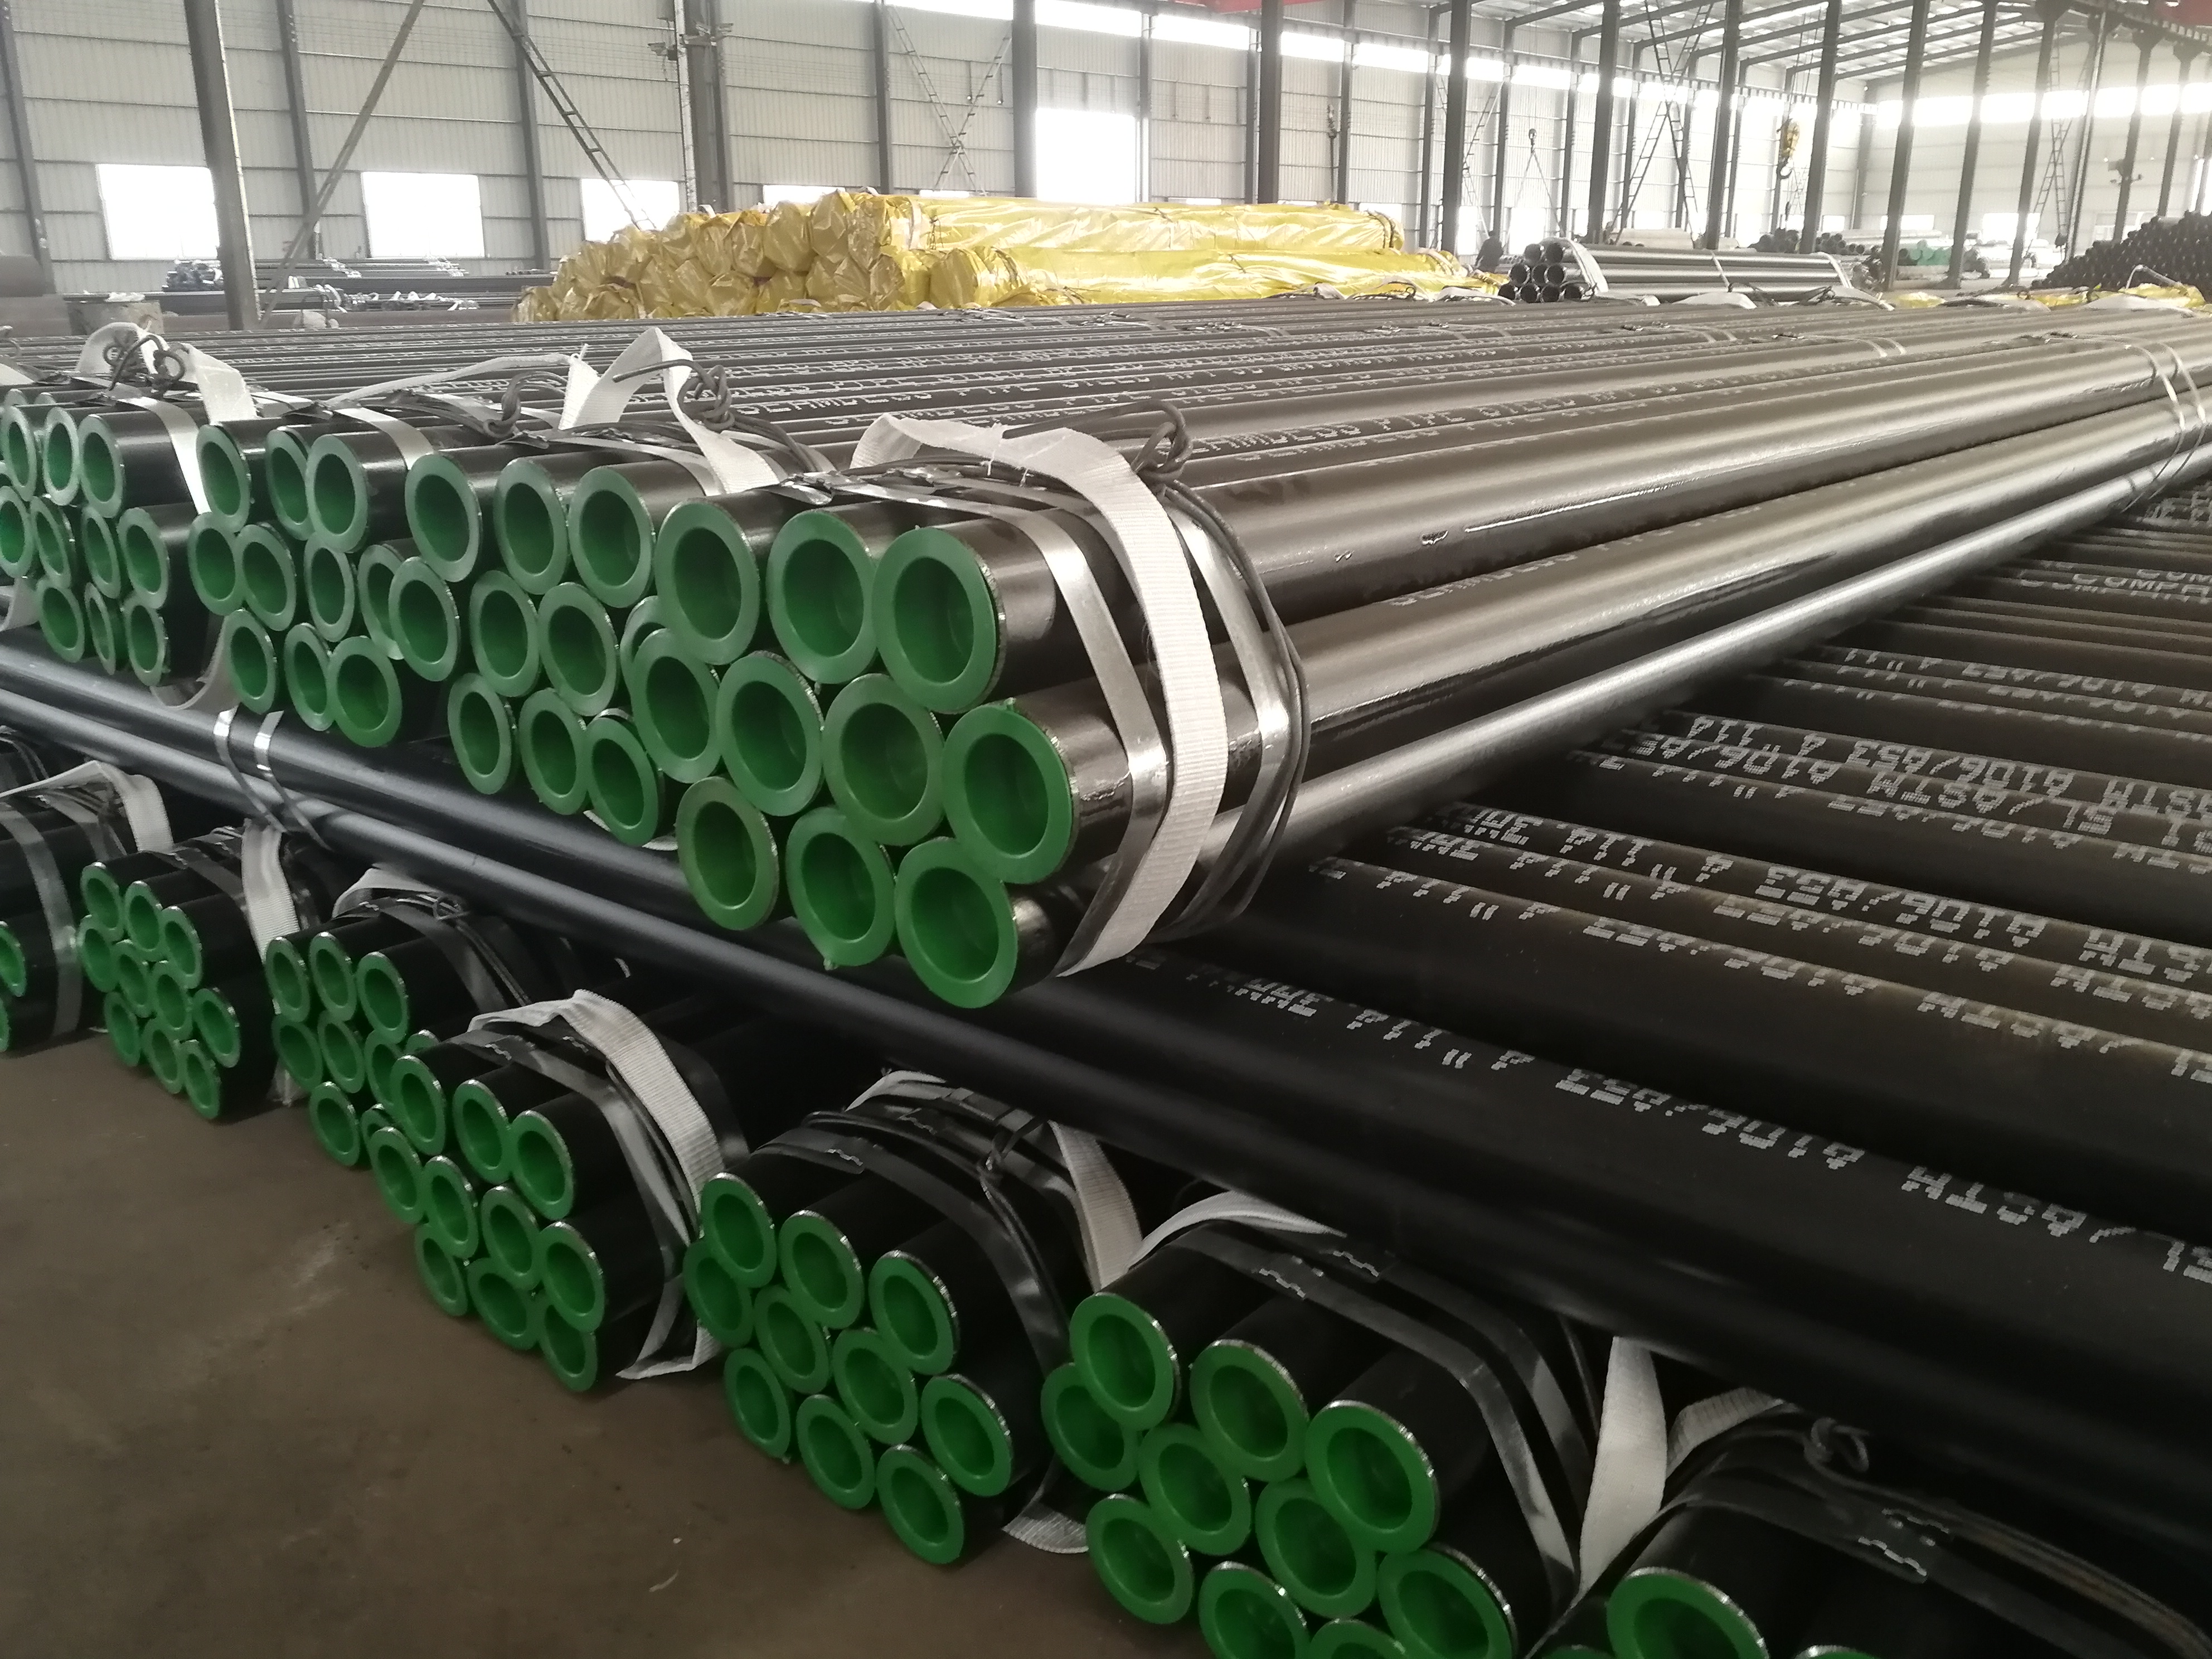 ASTM A 106 Black Carbon Seamless Steel Tubes for a variety of high temperature service applications